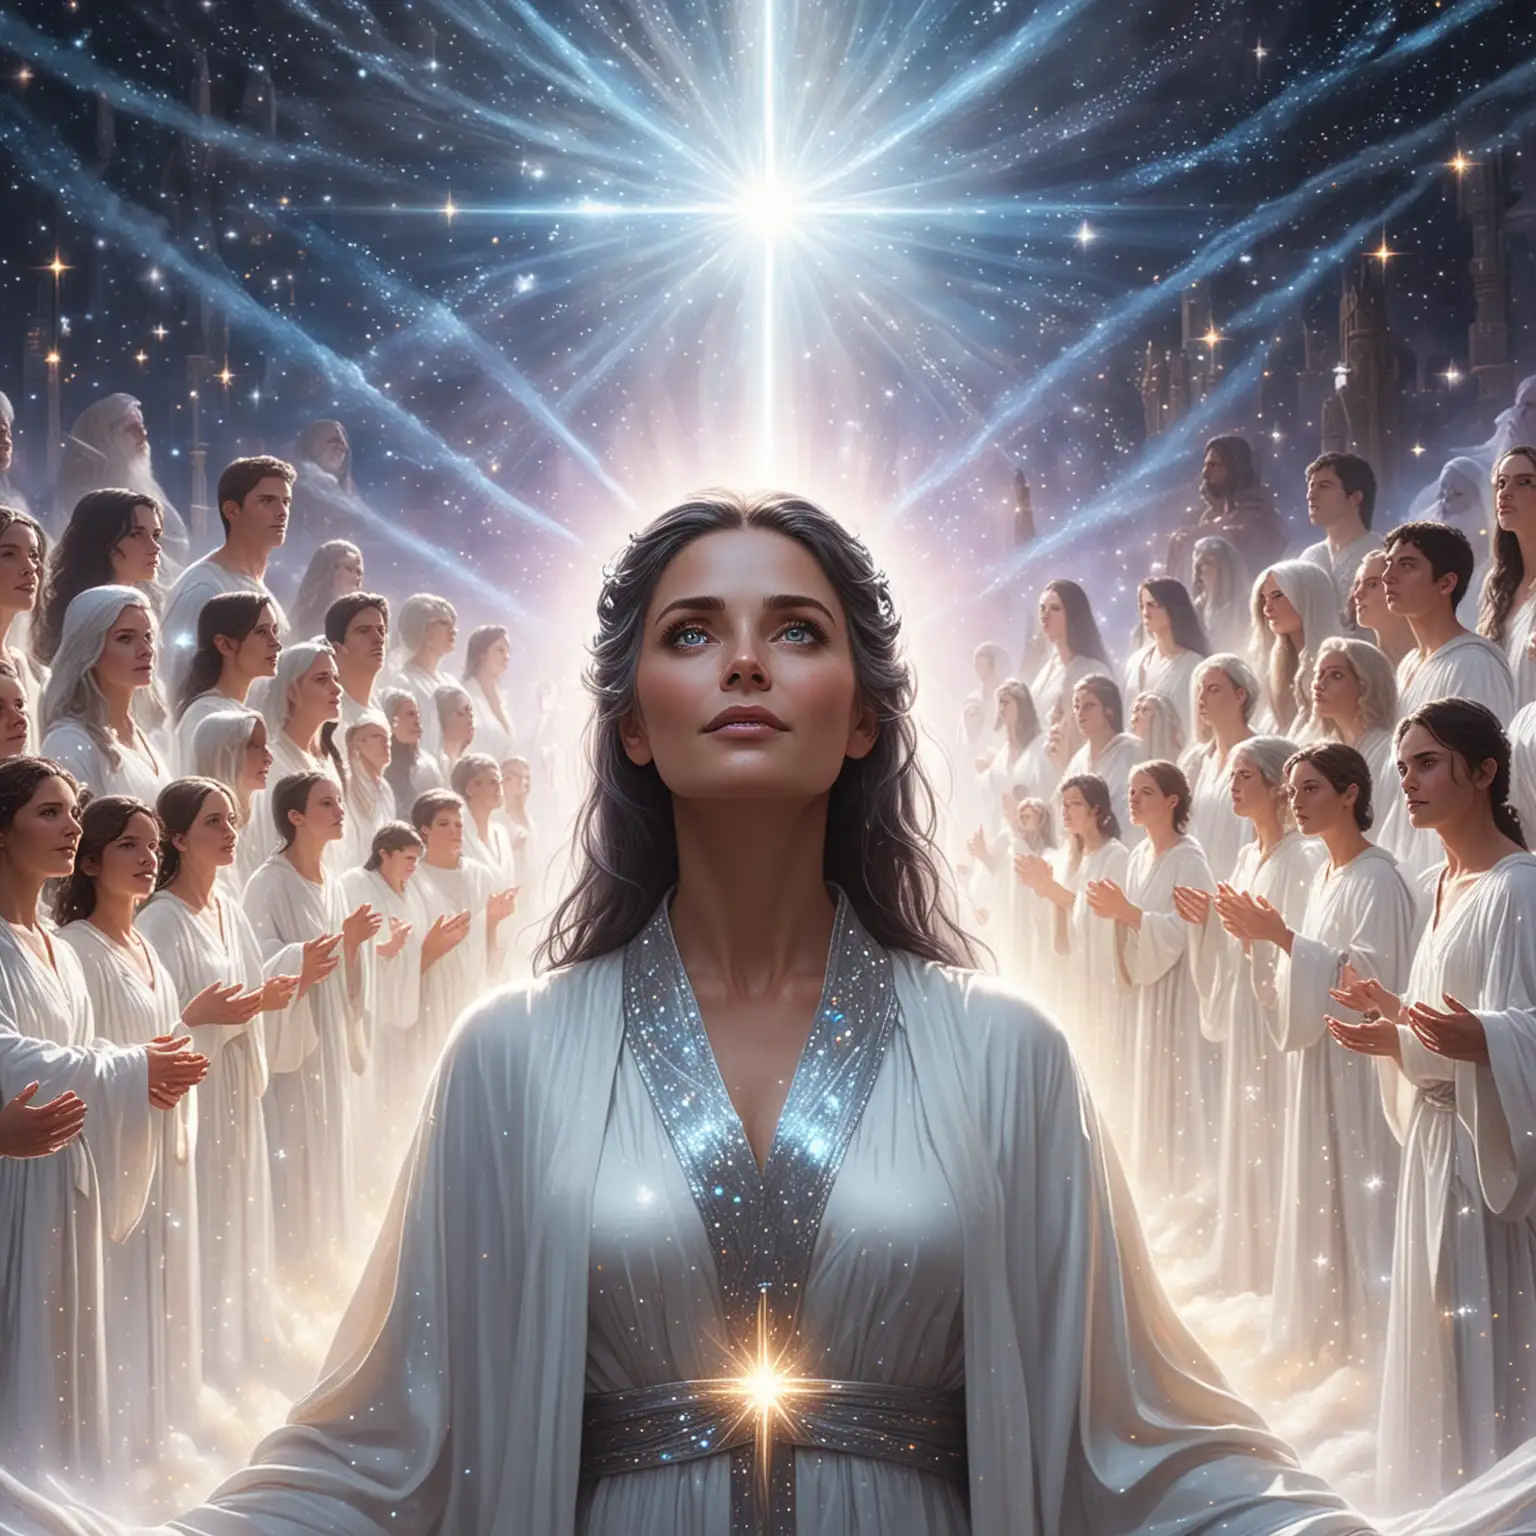 the a galactic mature woman with light blue eyes with dark hair dressed in glowing white robes with stars shining down on to the top of her head and surround by people dressed in iridescent robes